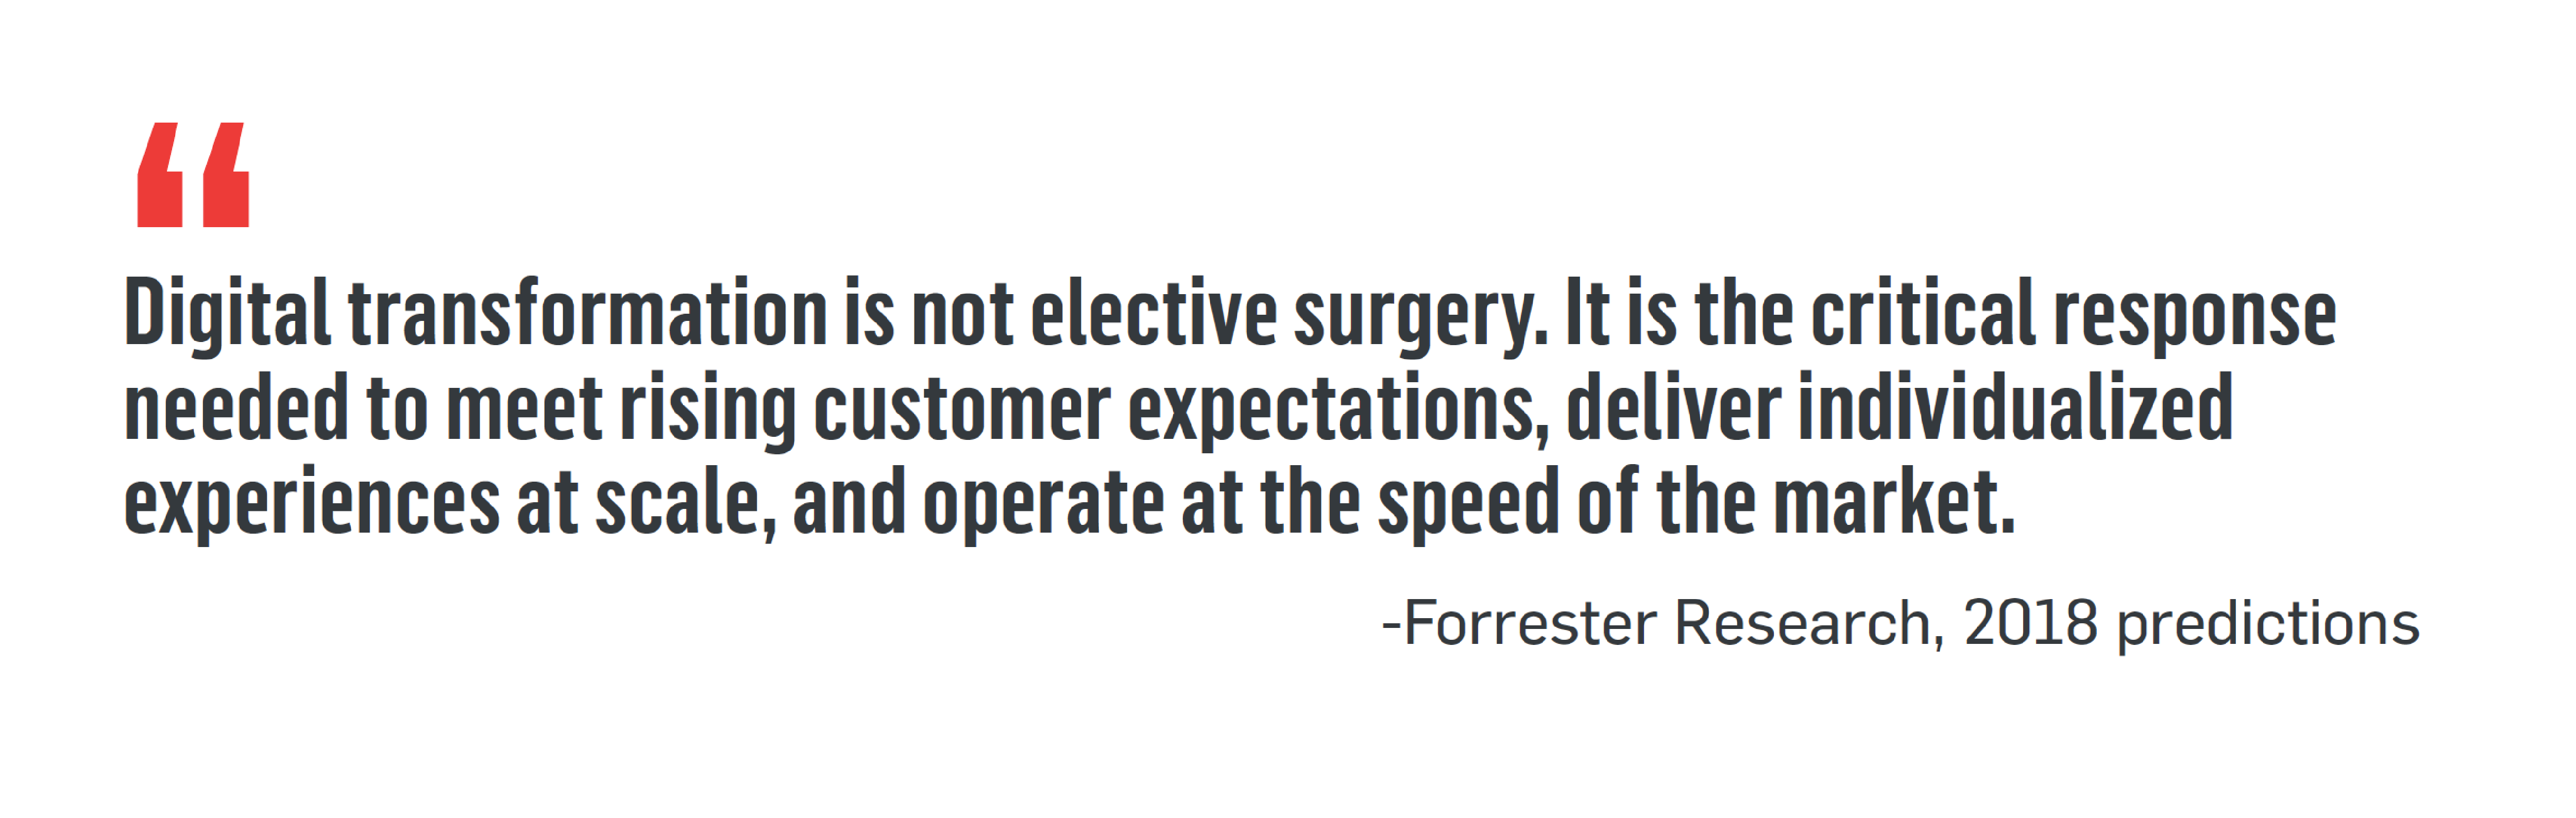 "Digital transformation is not elective surgery. It is the critical response needed to meet rising customer expectations, deliver individualized experiences at scale, and operate at the speed of the market." -Forrester Research, 2018 predictions